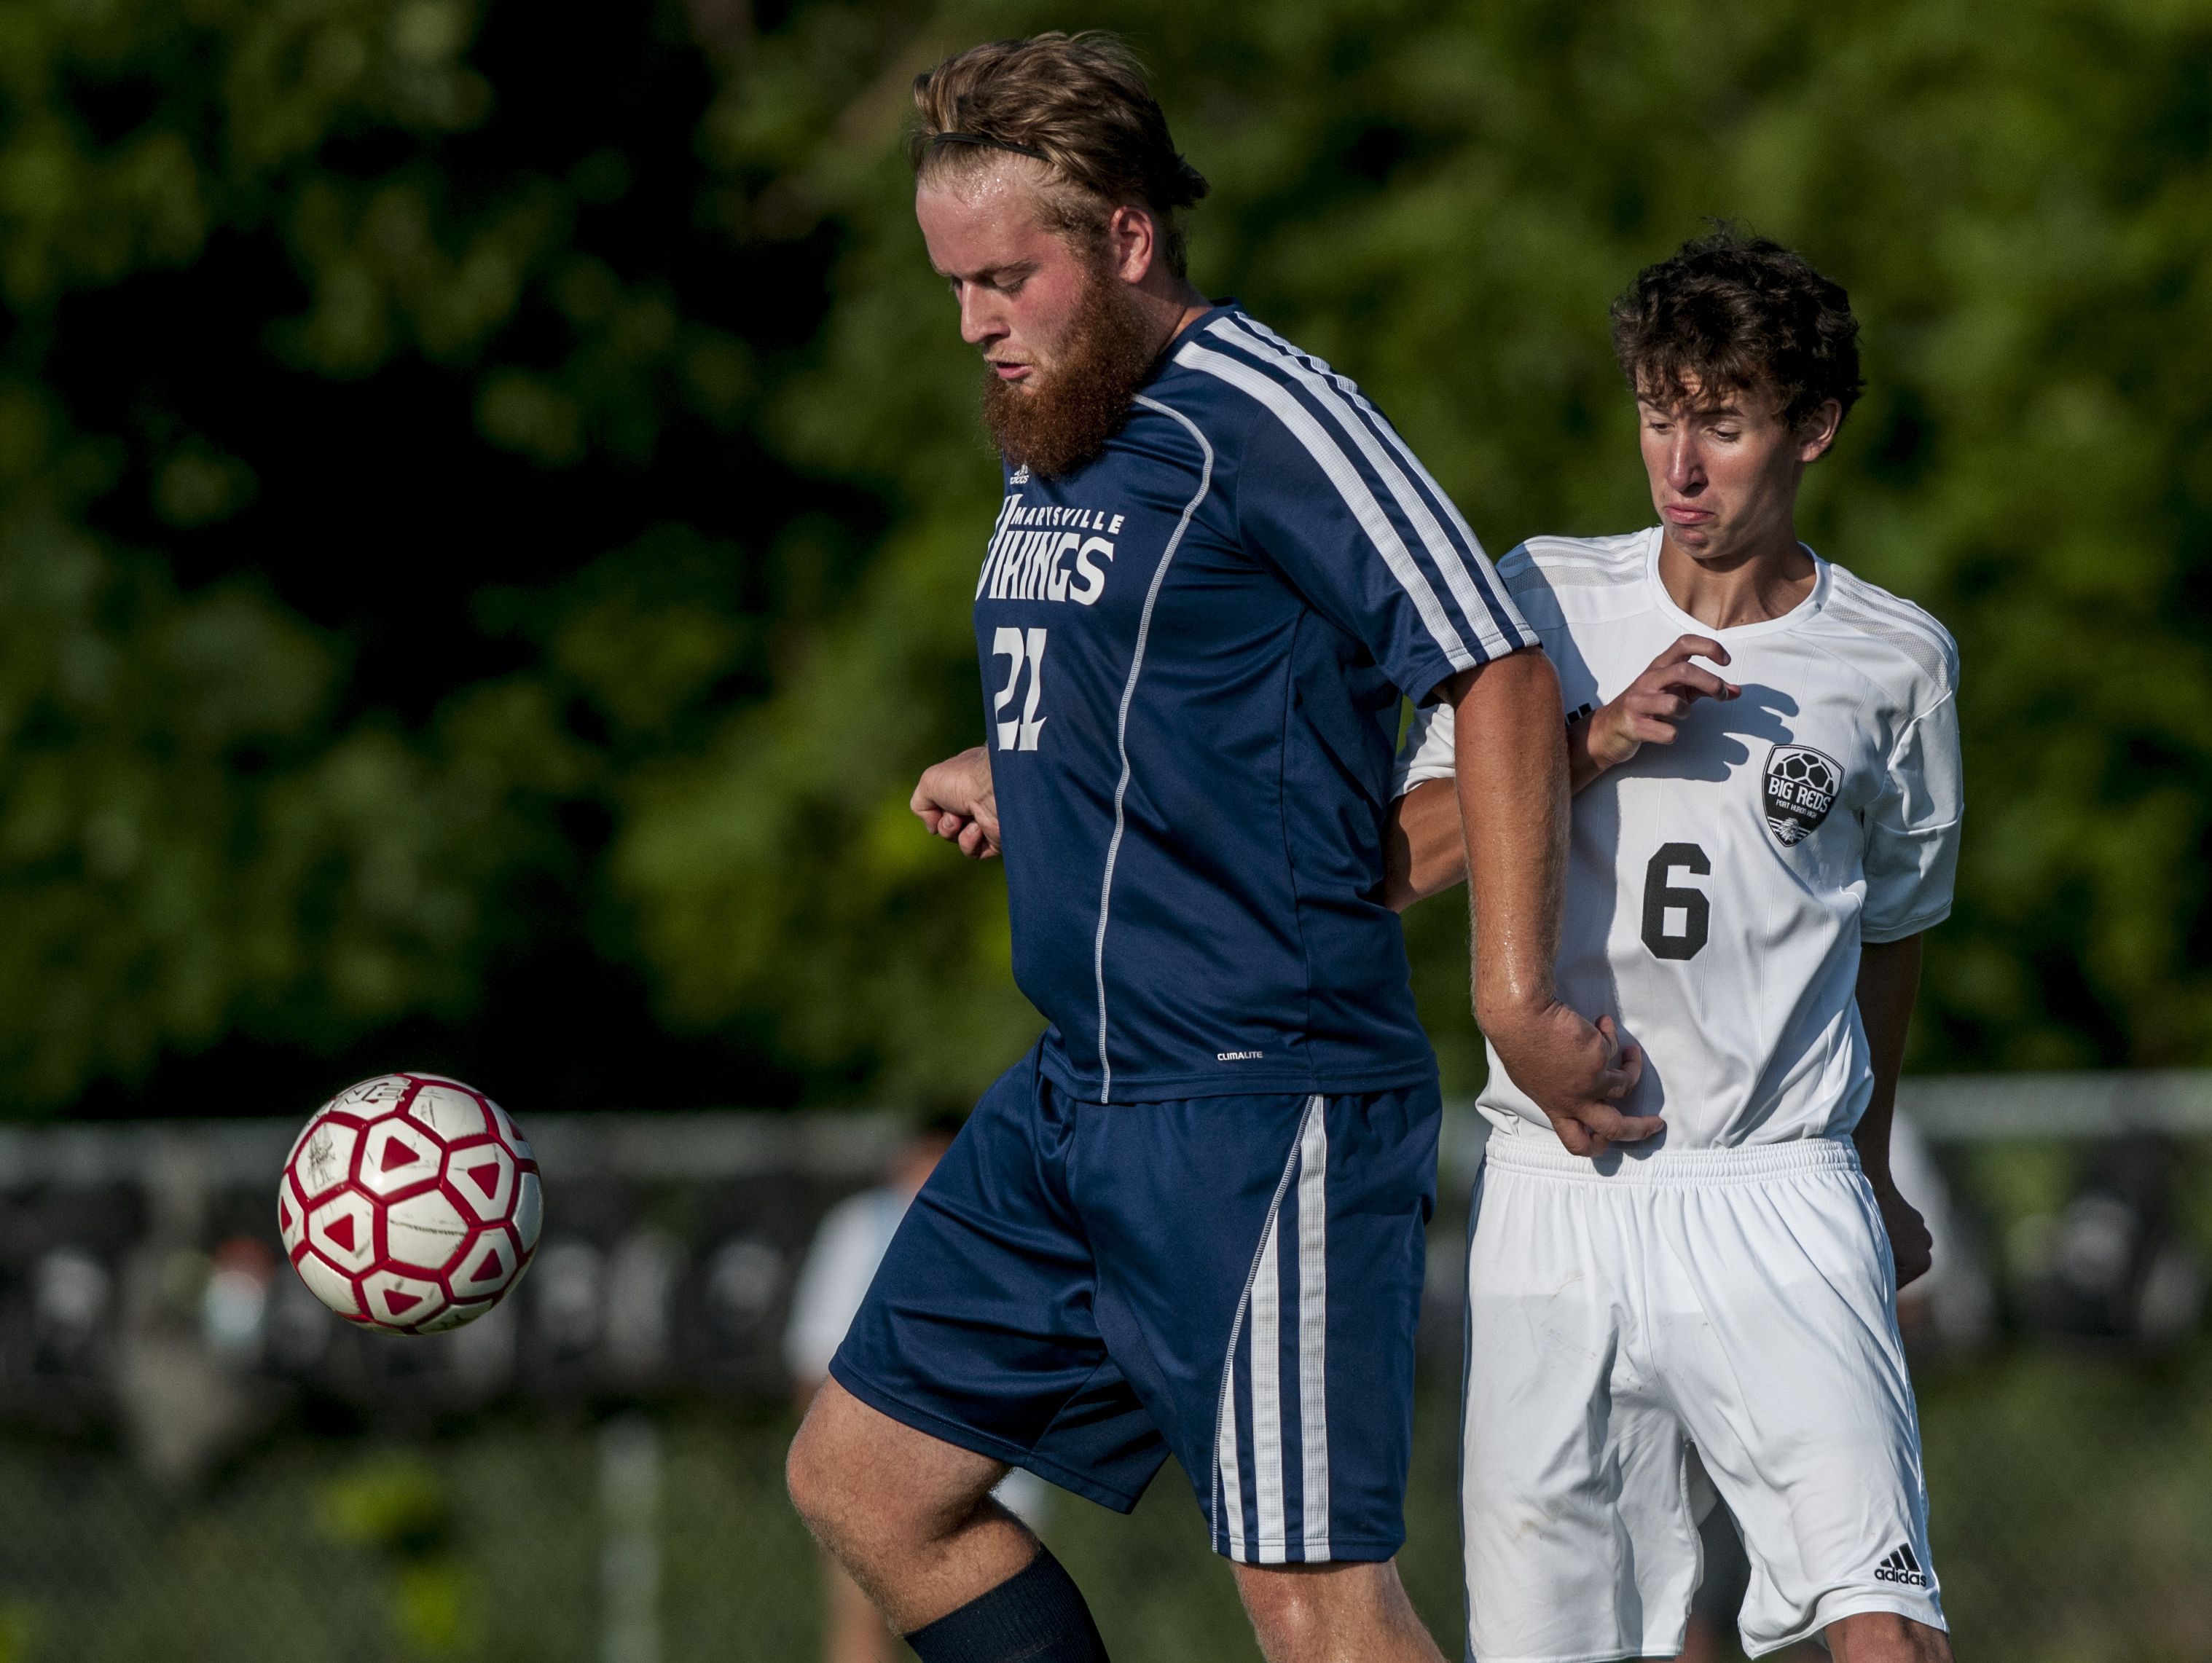 Marysville's Bryan DiNardo controls the ball in front of Port Huron's Joey Holzberger during a soccer game Wednesday, August 31, 2016 at Port Huron Northern High School.